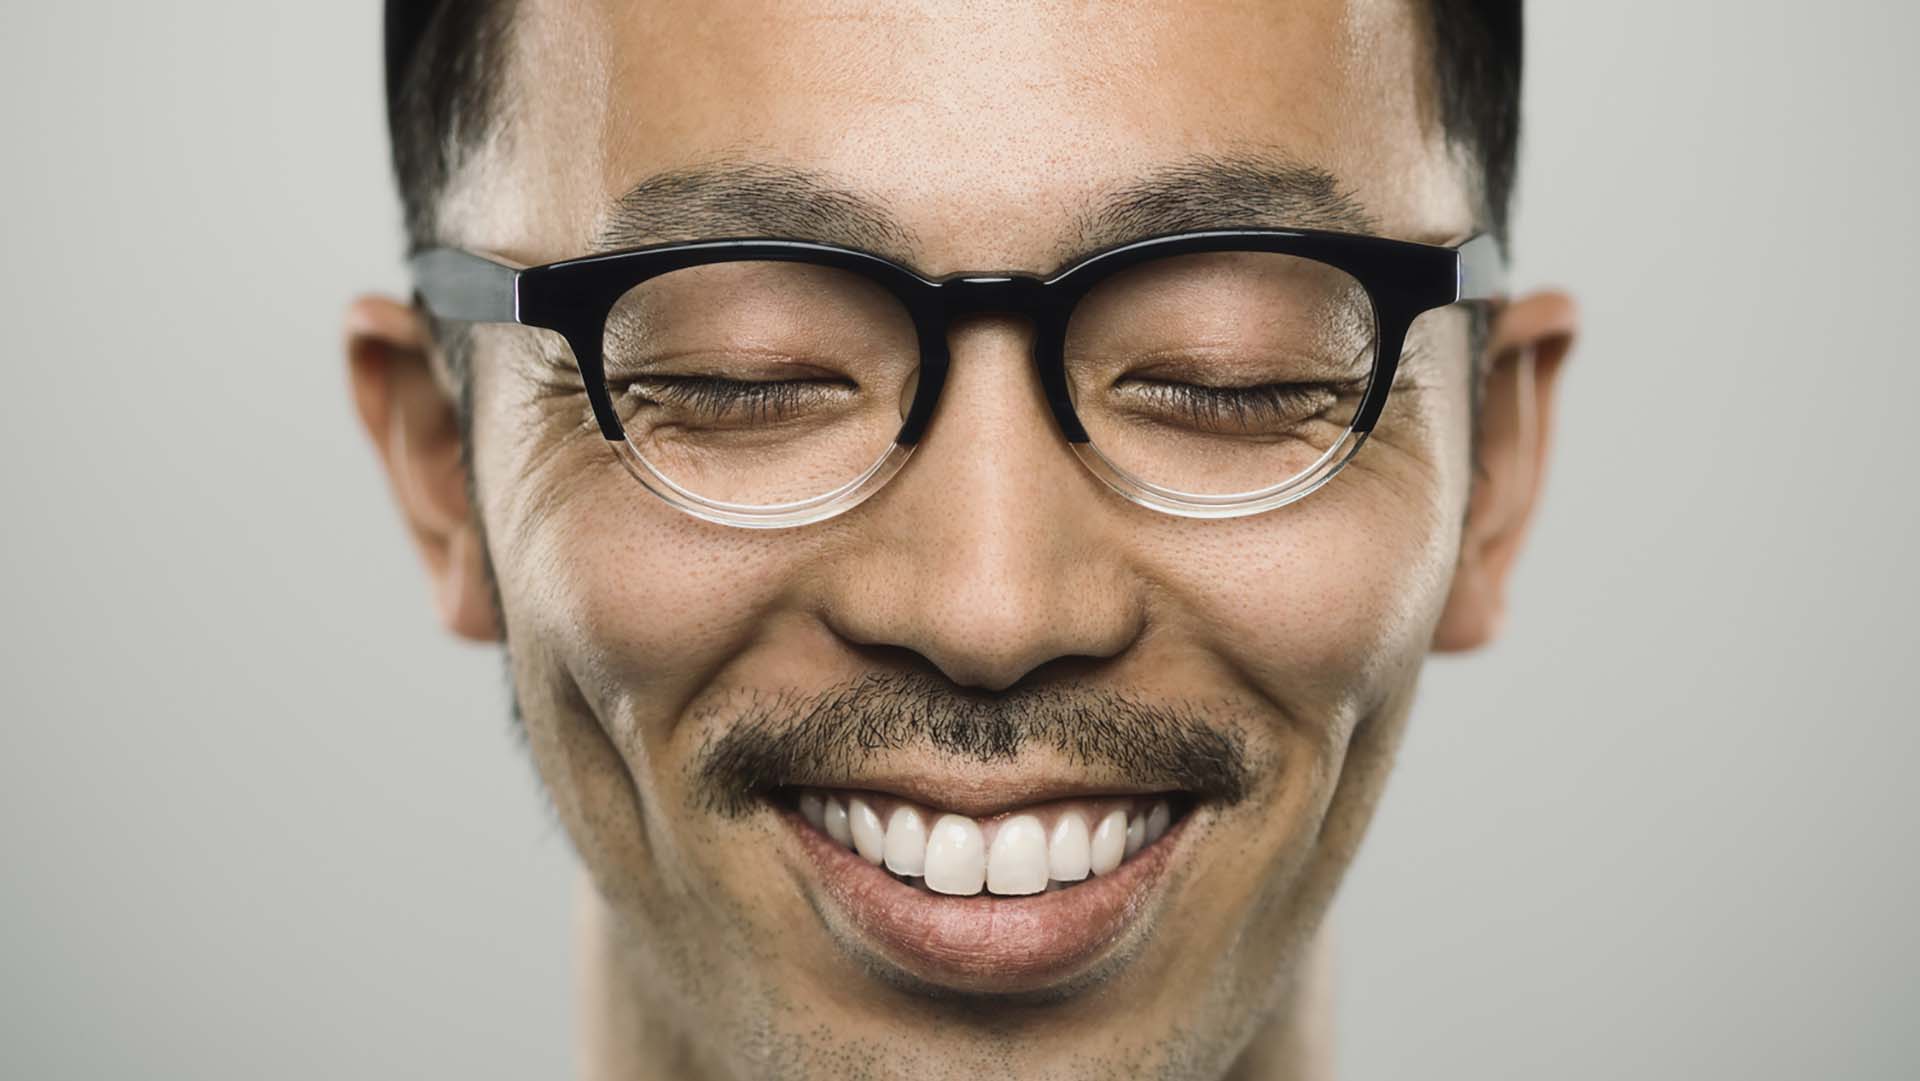 Studio portrait of a japanese young man with closed eyes and very big smile. The man is around 30 years and has short hair and casual clothes, wearing a baseball cap and glasses. Vertical color image from a medium format digital camera. Sharp focus on eyes.